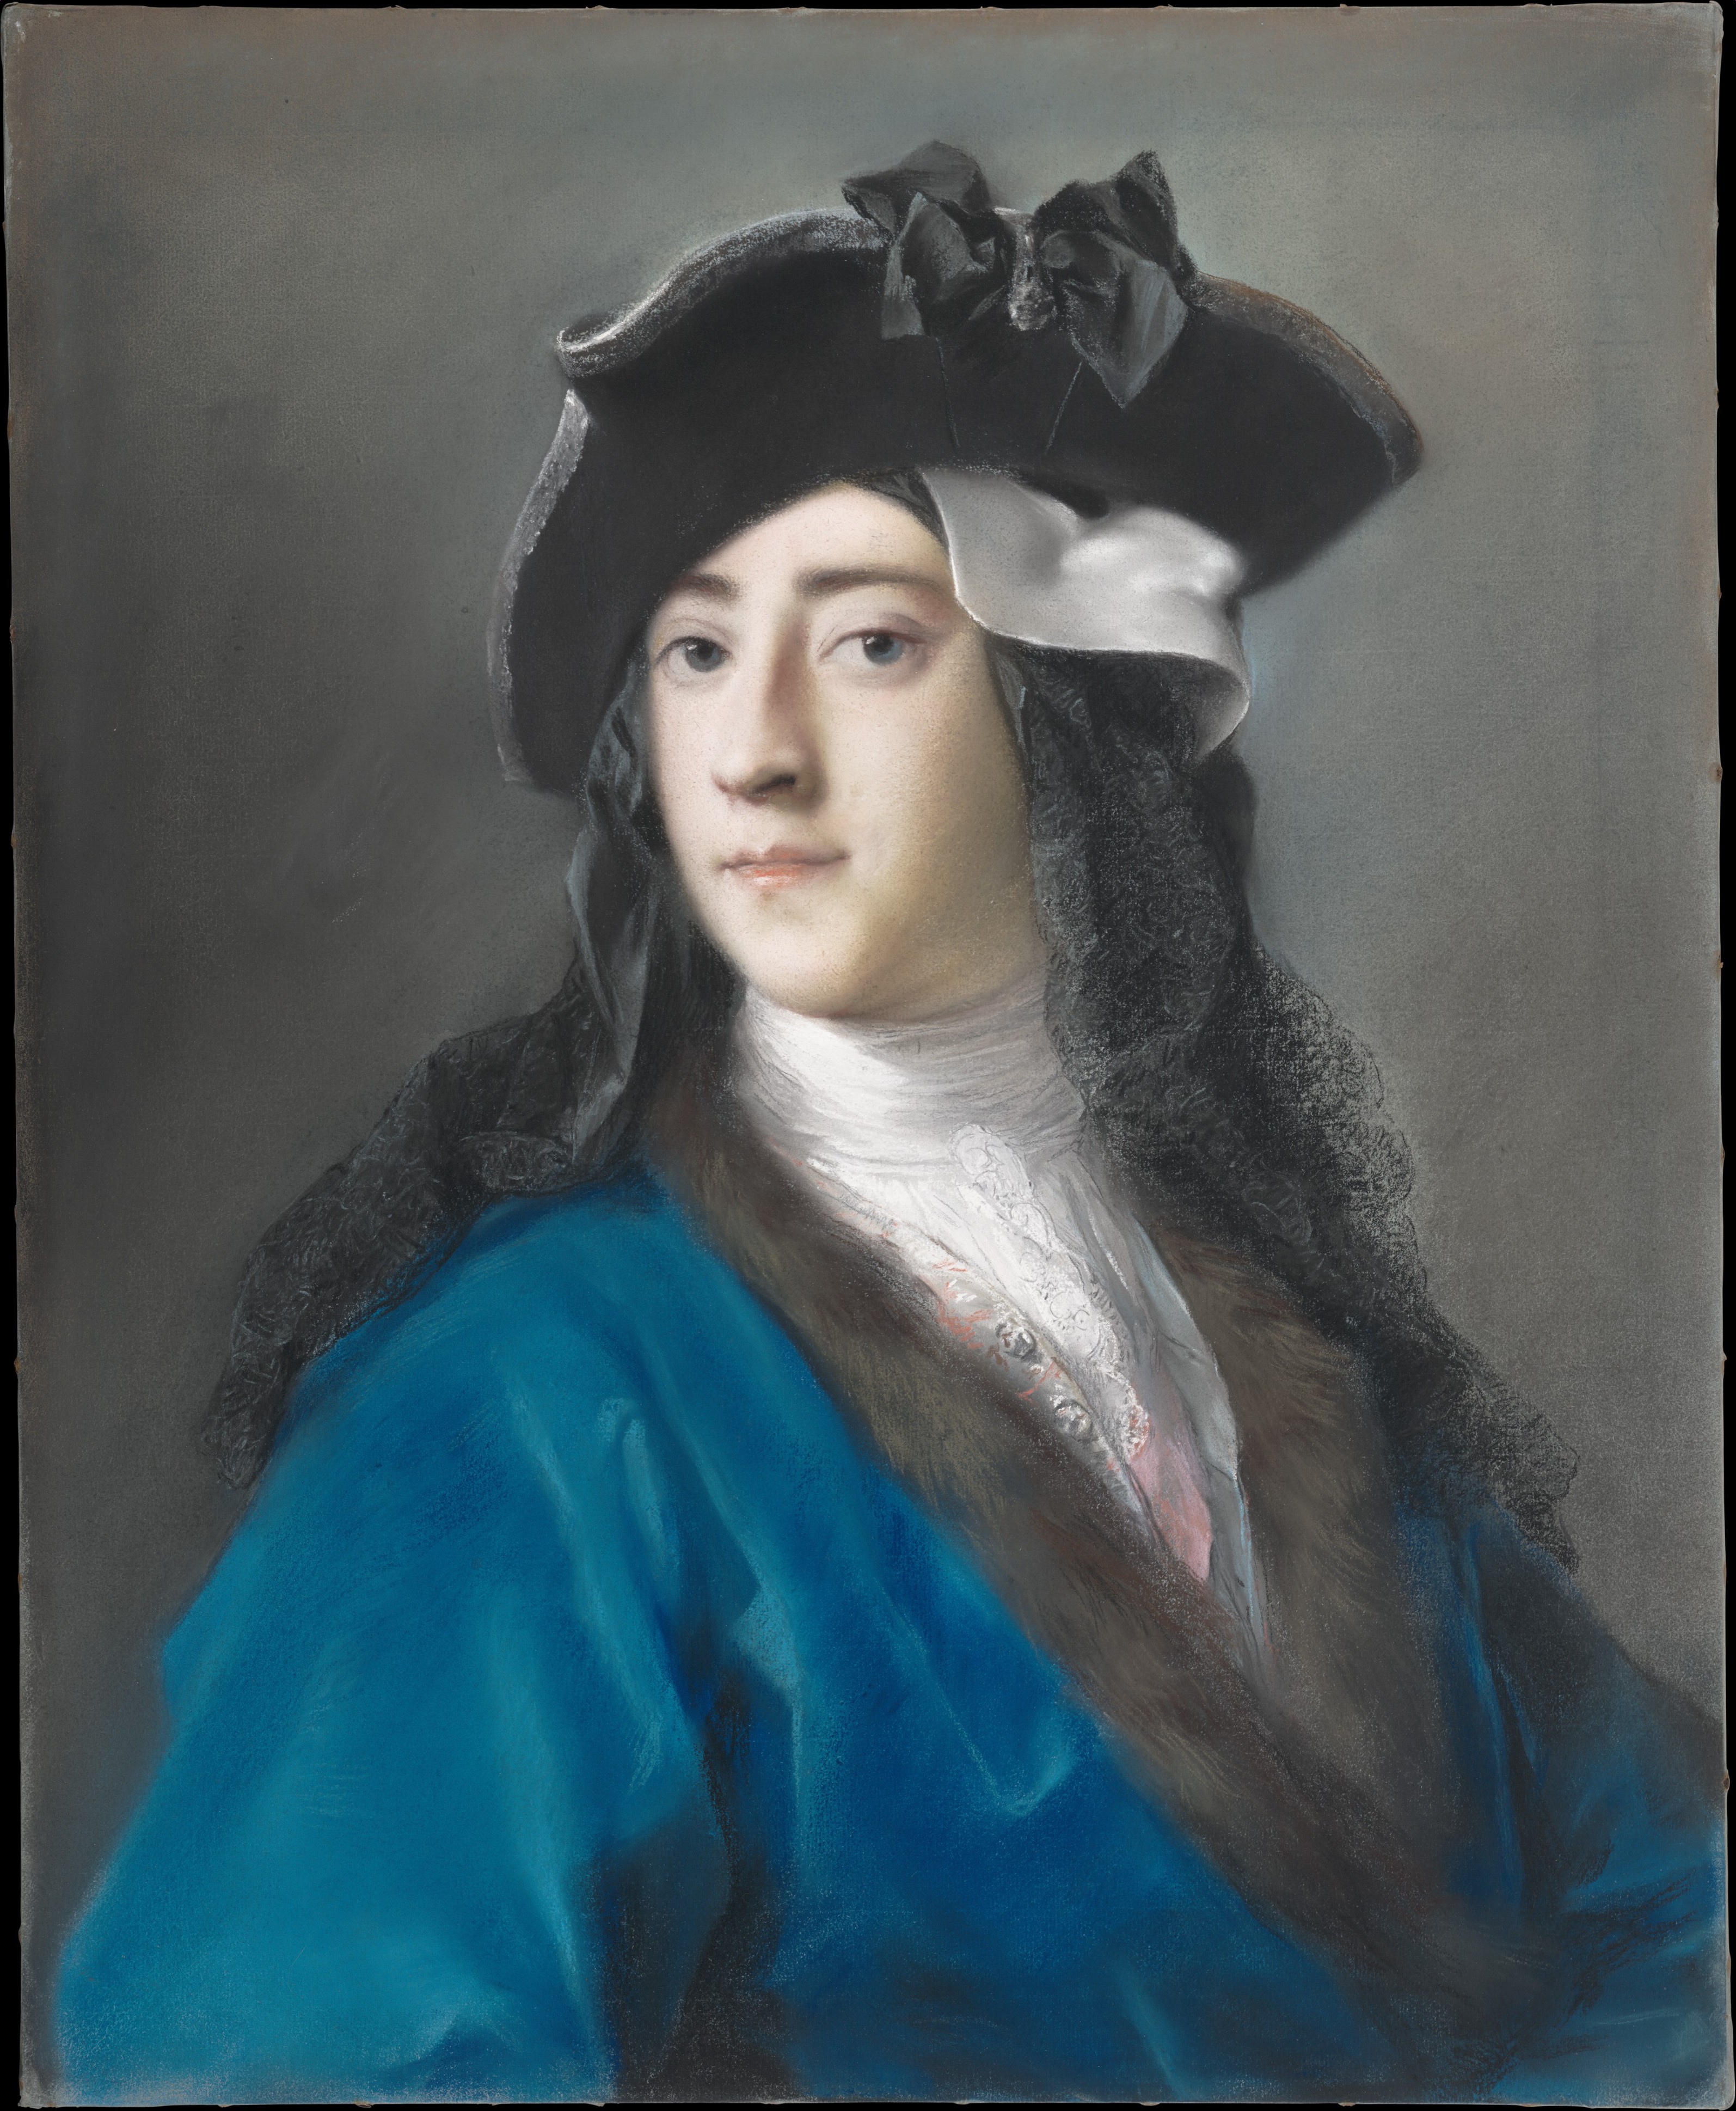 A half-length portrait of a man wearing a bright blue coat trimmed with fur and an elaborate black and white hat. He looks at the viewer with a slight smile.